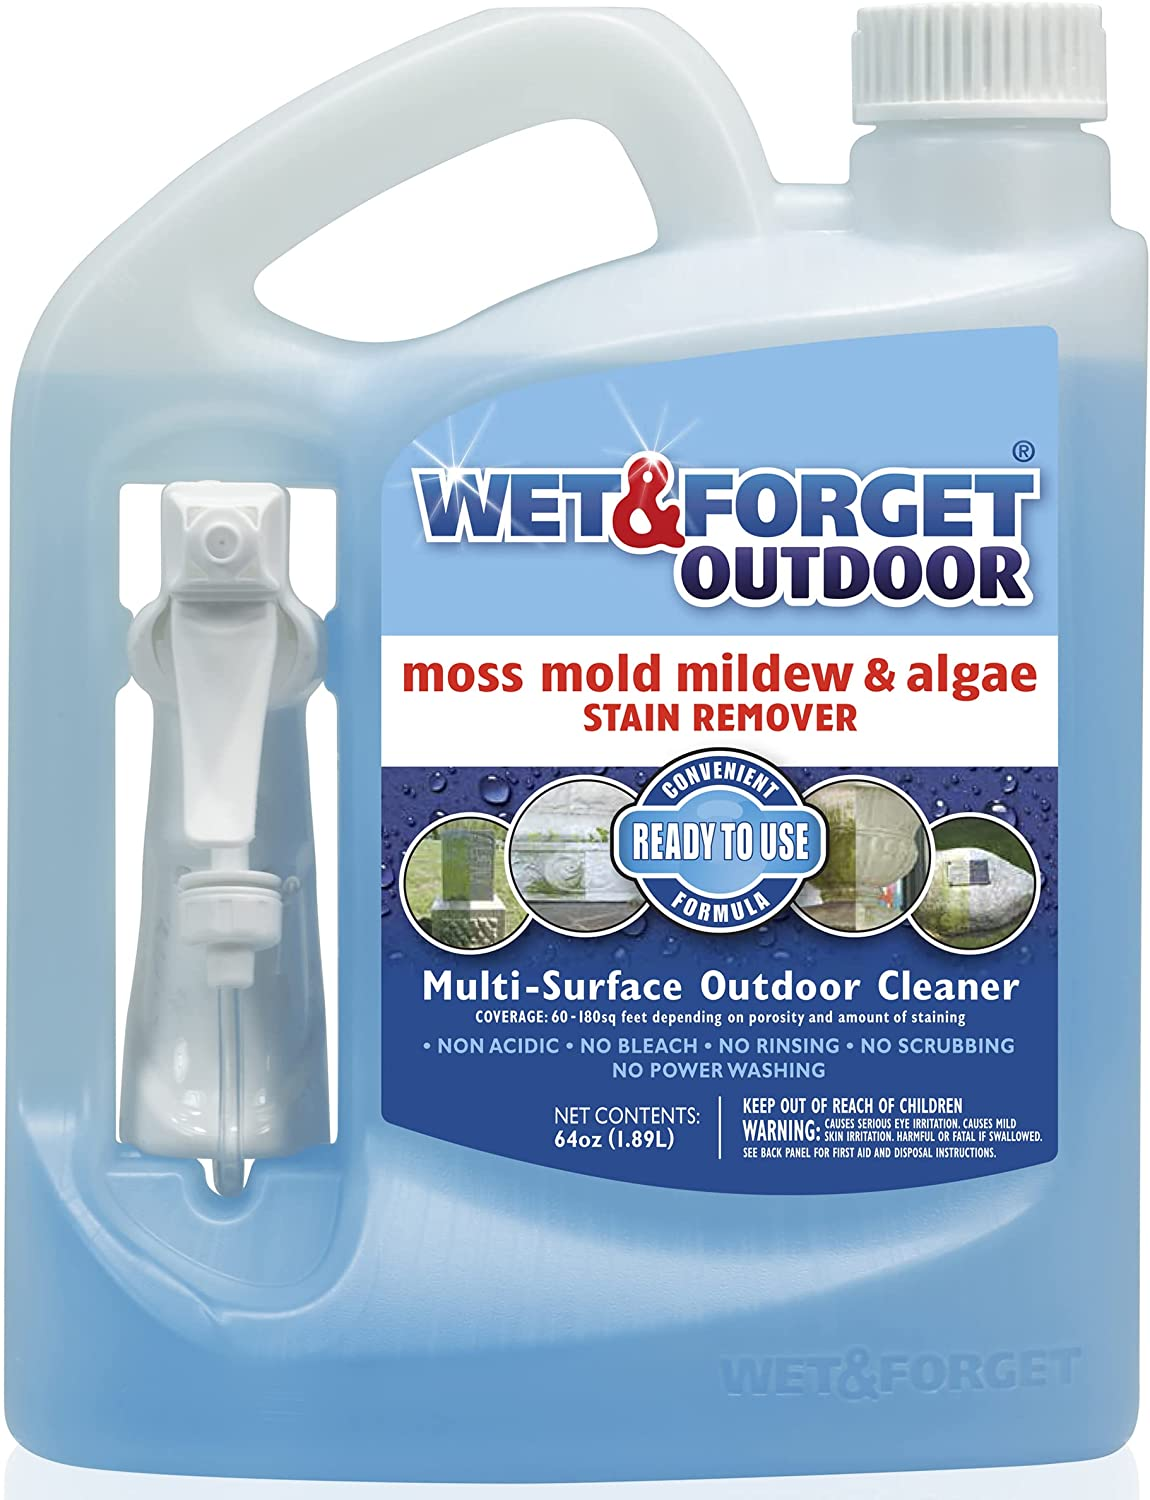 64 Oz Wet & Forget Outdoor Moss/Mold/Mildew/Algae Stain Remover Multi-Surface Cleaner $19.98